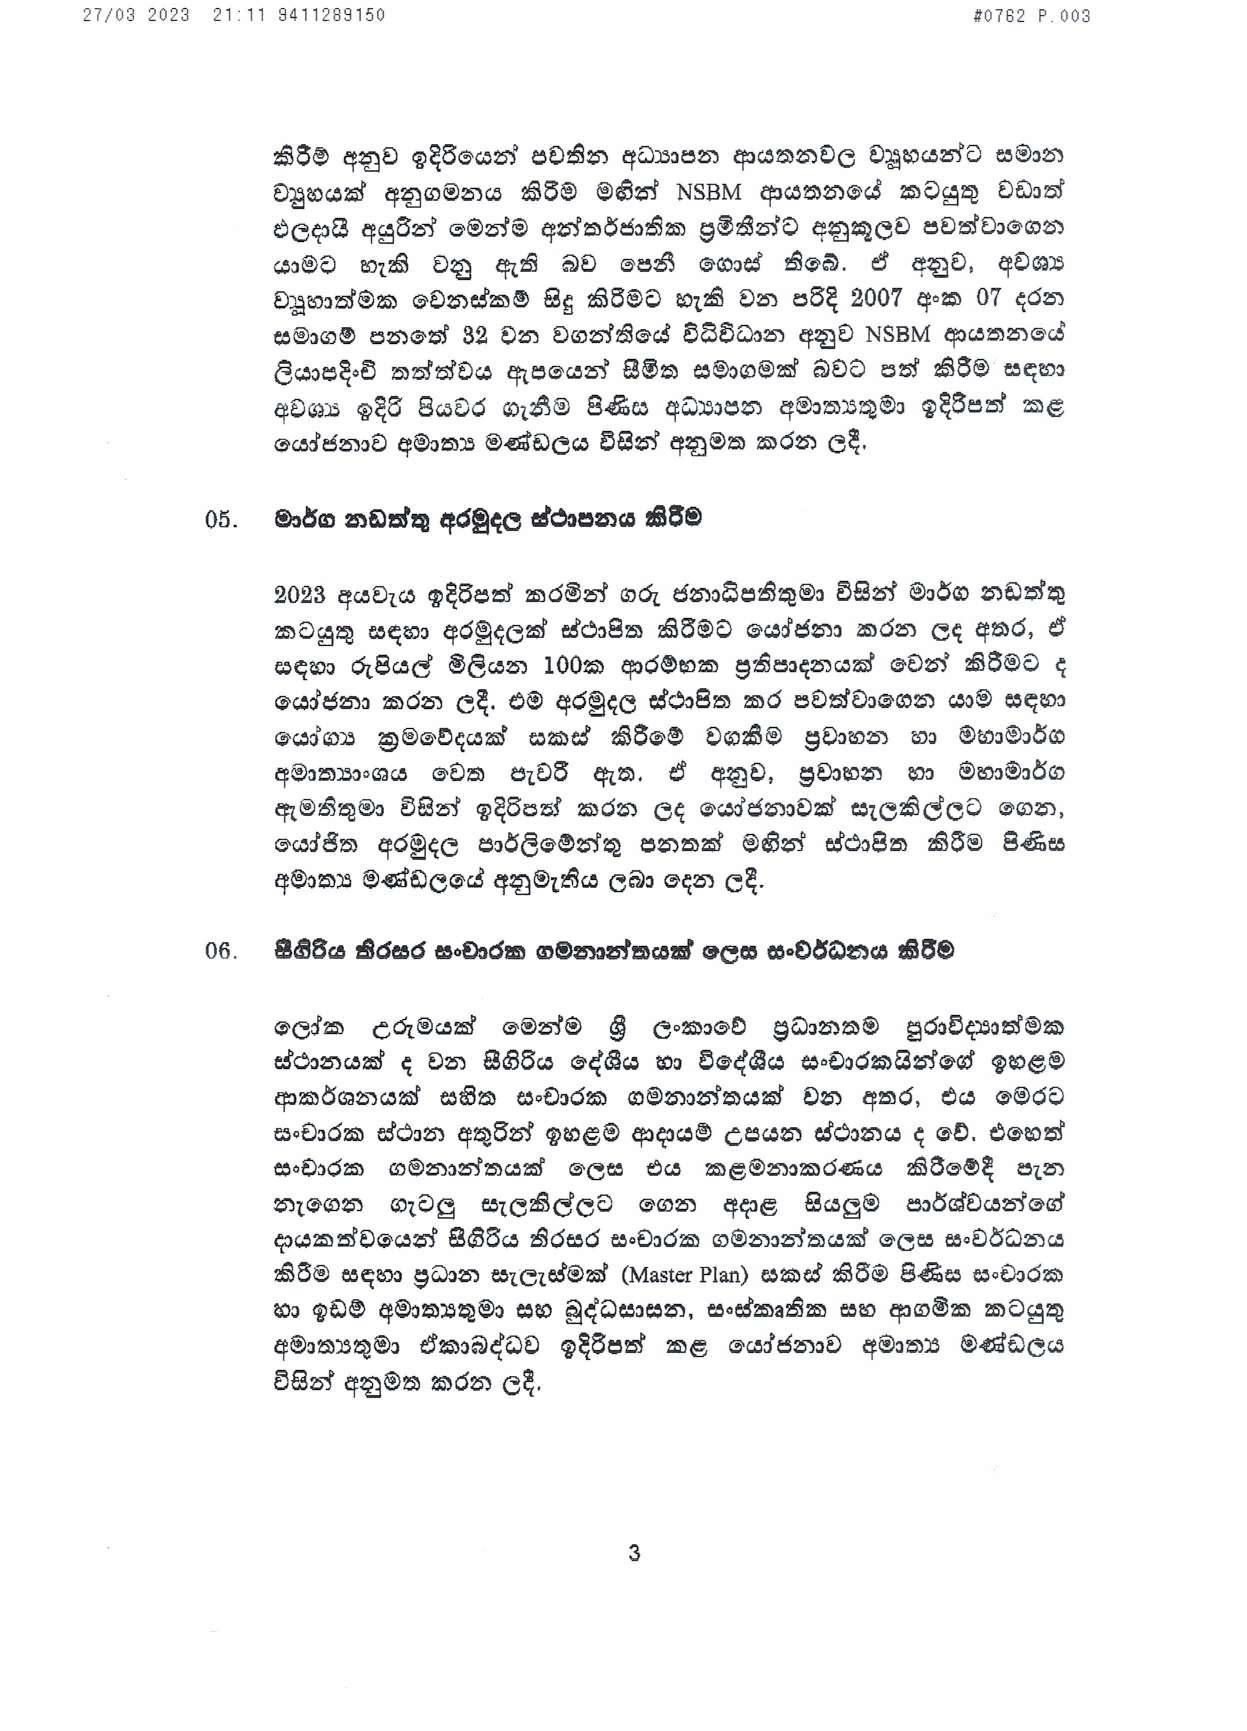 Cabinet Decision on 27.03.2023 page 003